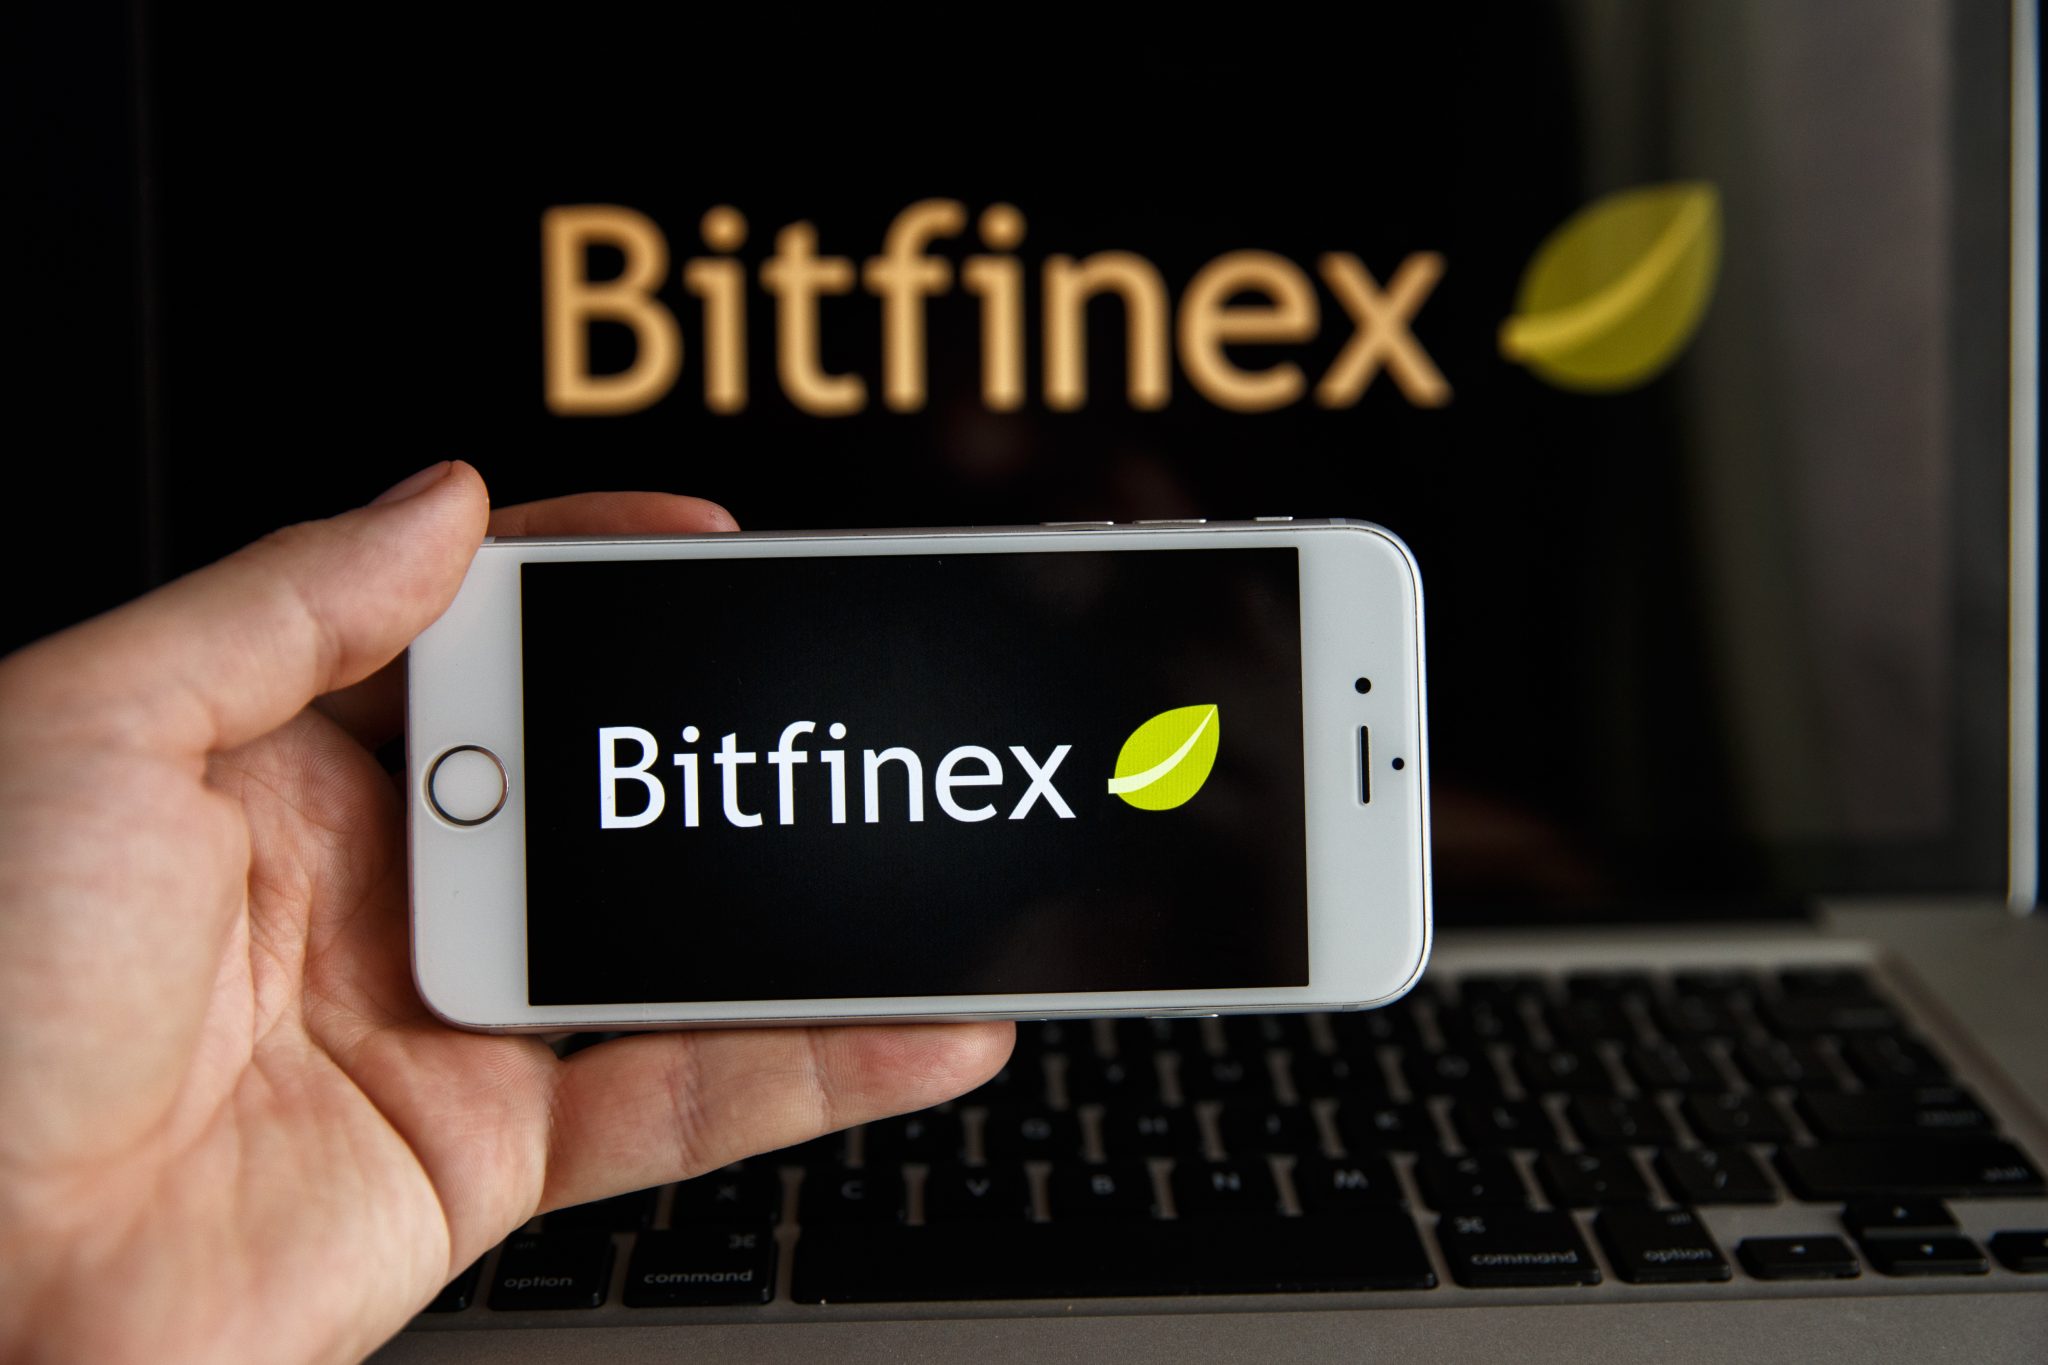 Tula, Russia - October 31, 2018: - Bitfinex website displayed on the smartphone screen. Bitfinex is a cryptocurrency trading platform.